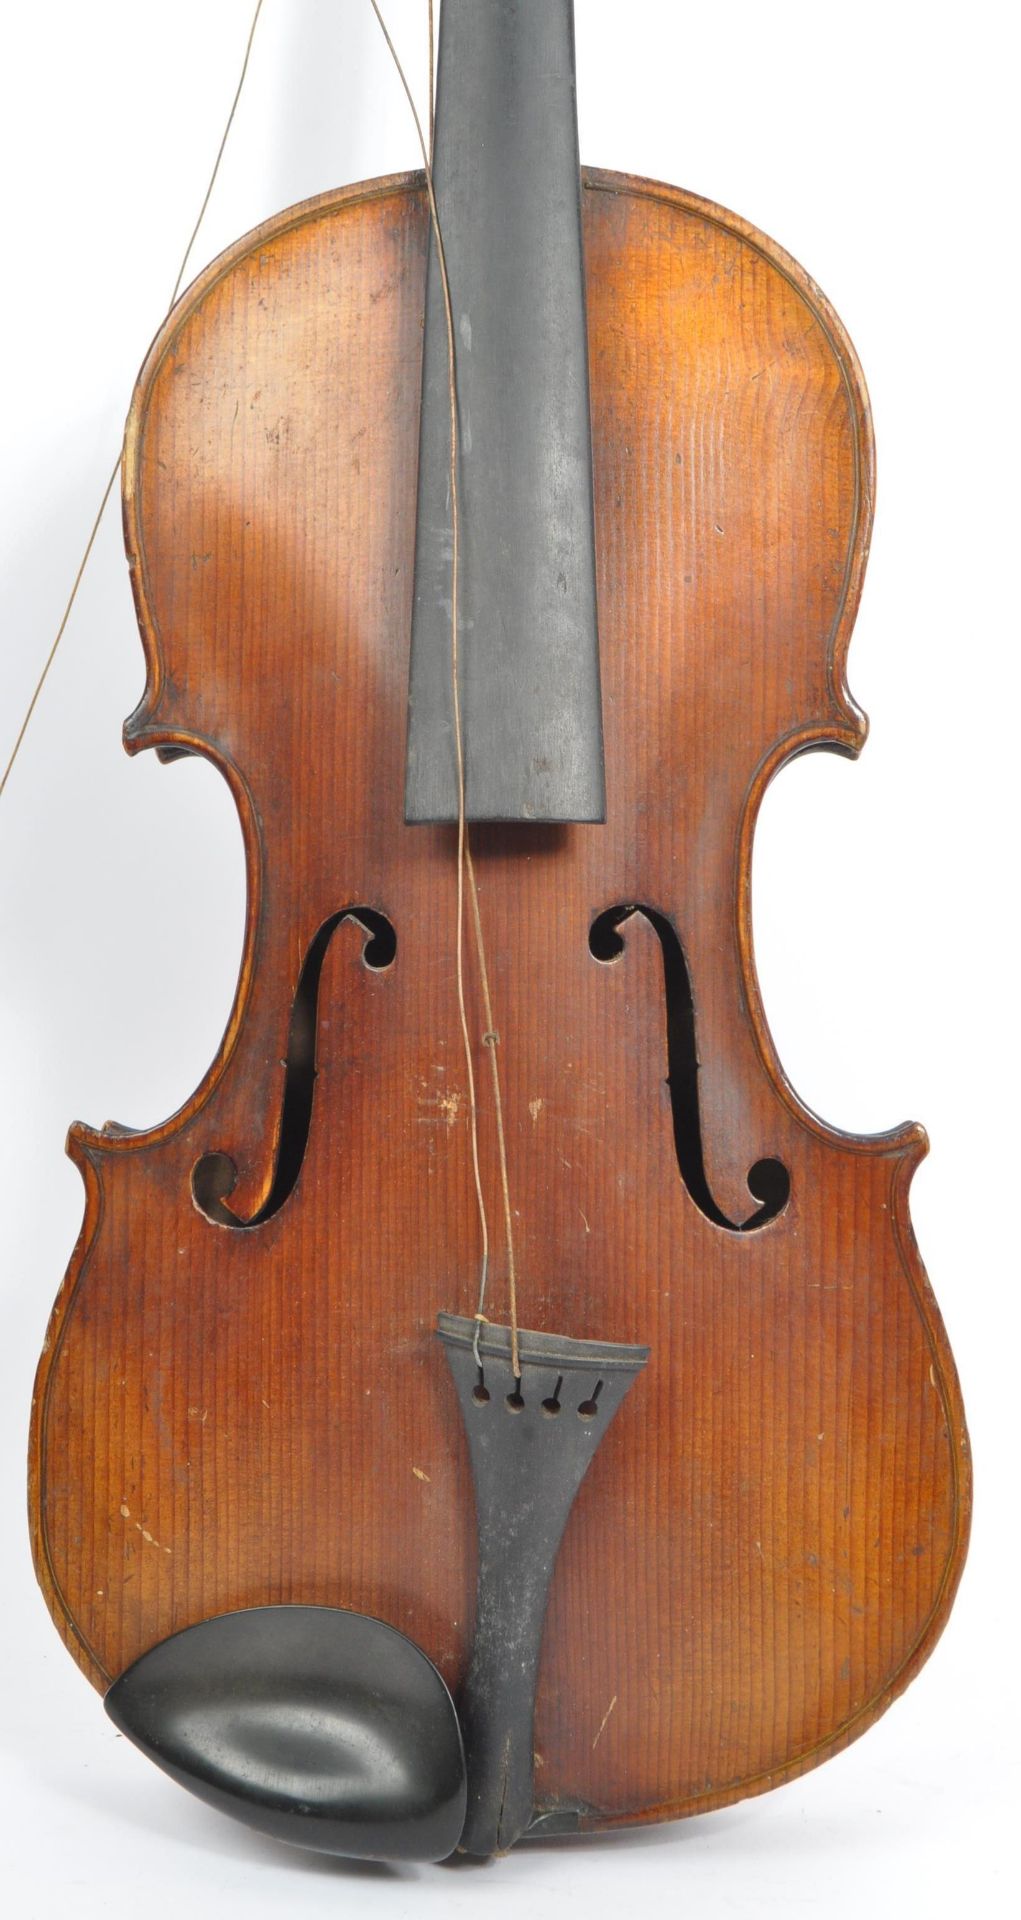 LATE 19TH / EARLY 20TH CENTURY FULL SIZE VIOLIN - Image 2 of 7